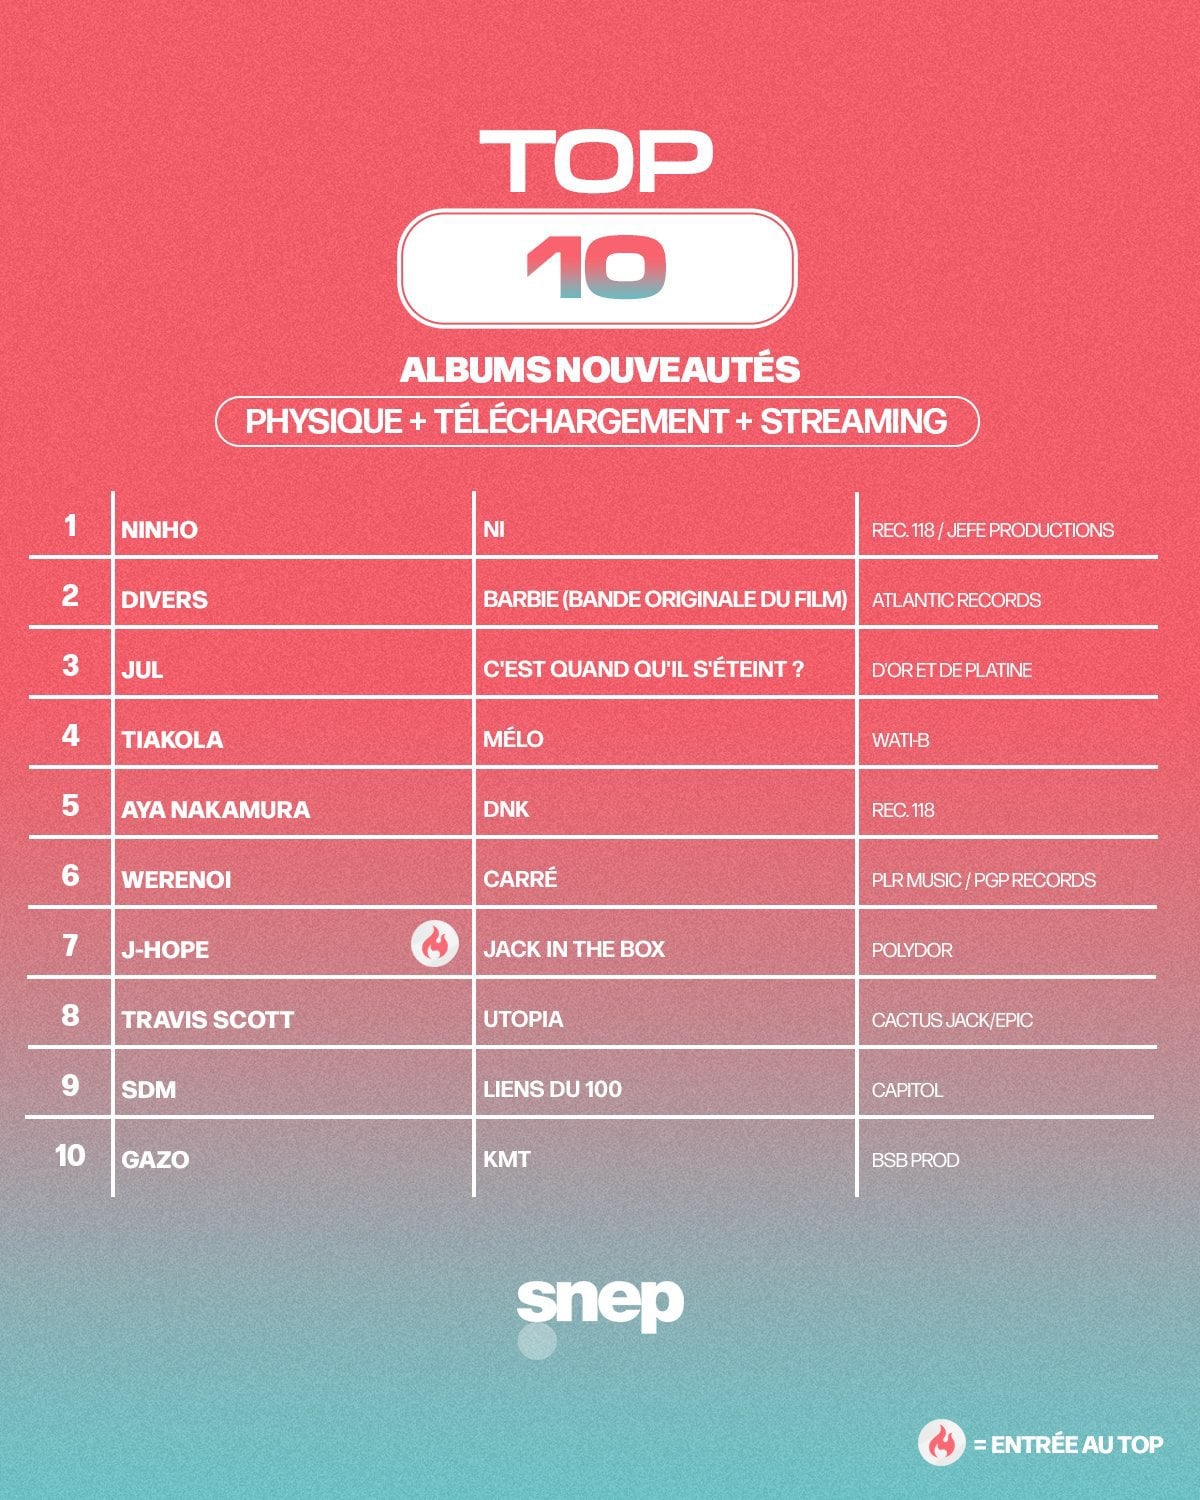 230825 j-hope's "Jack In The Box" charts inside the Top 10 of the French Albums Chart (SNEP) this week at a new peak of #7!